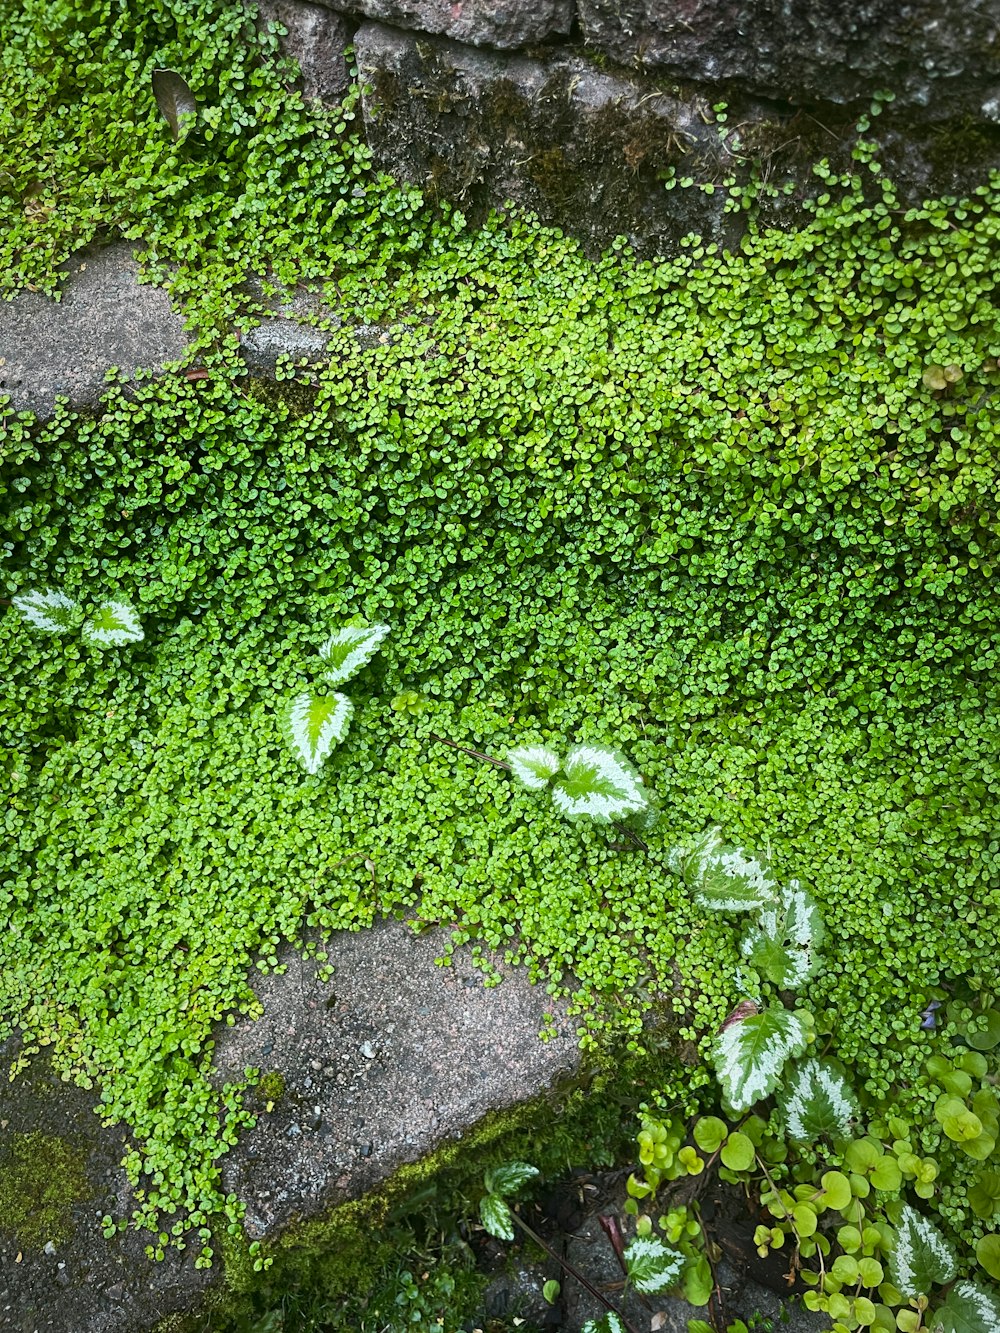 a close-up of some moss